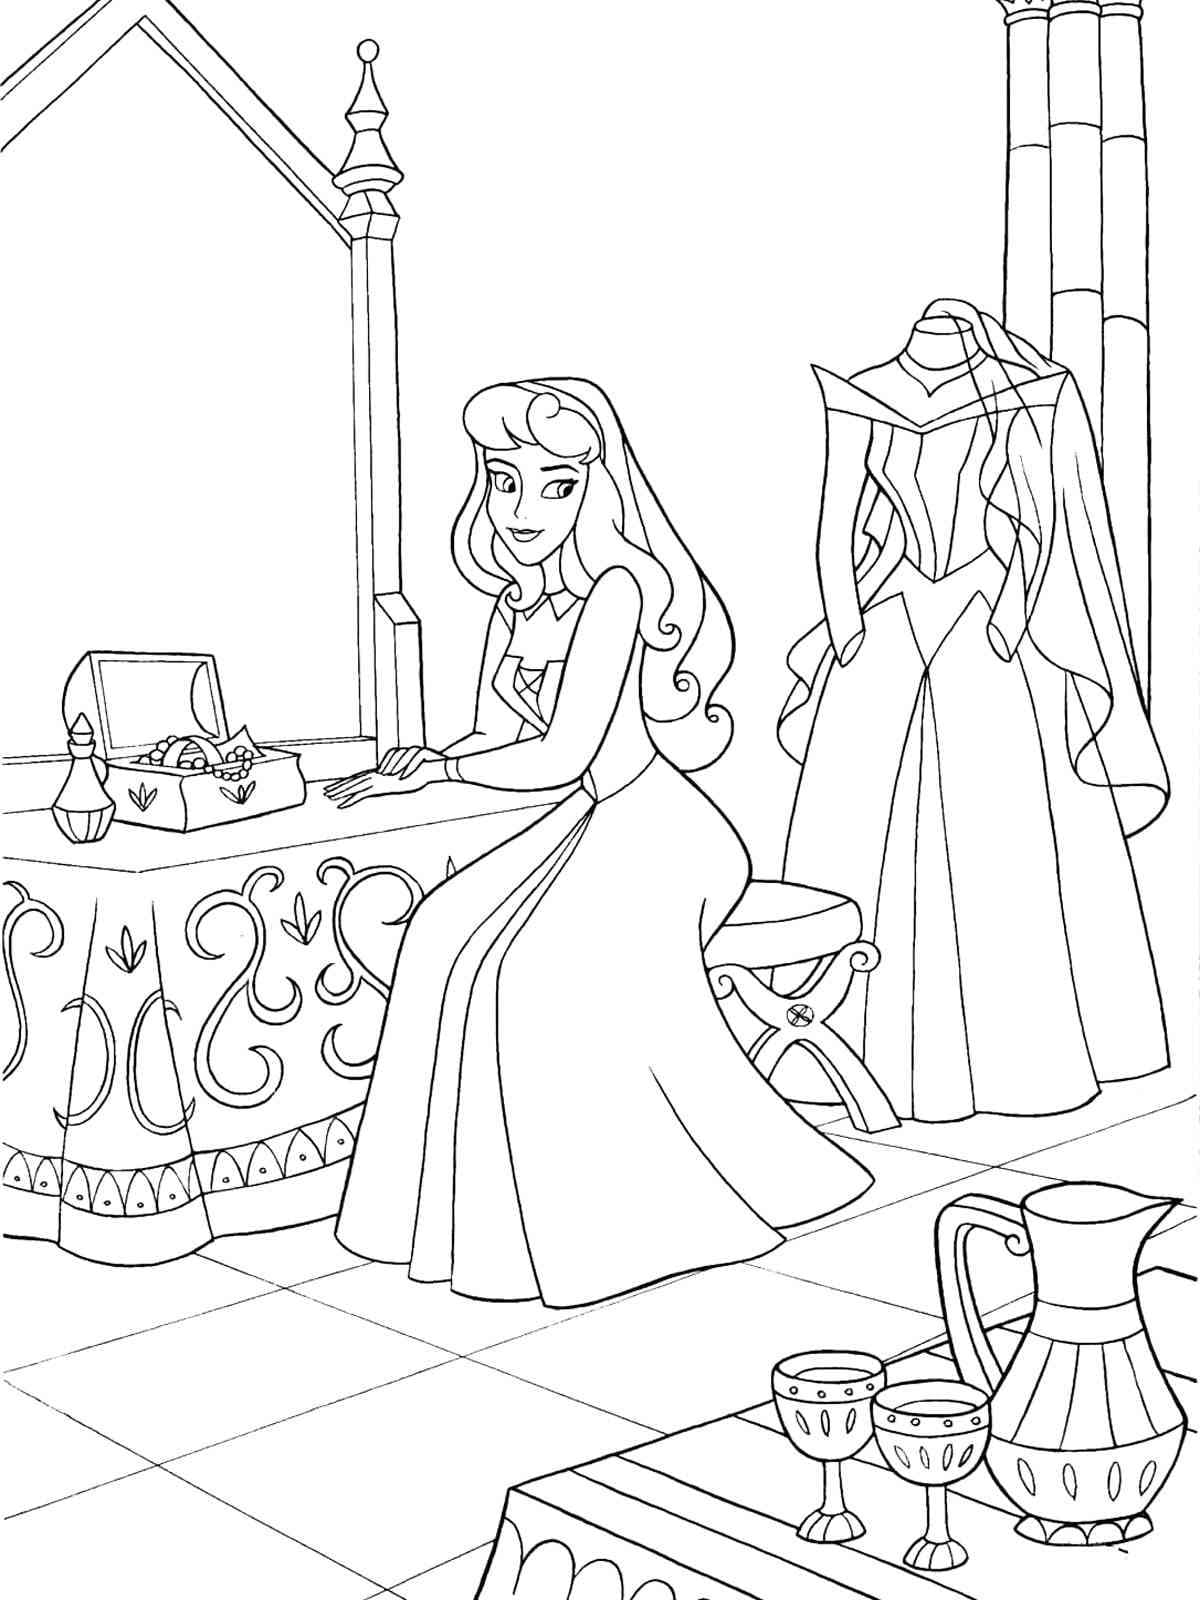 Smiling Aurora coloring page - Download, Print or Color Online for Free